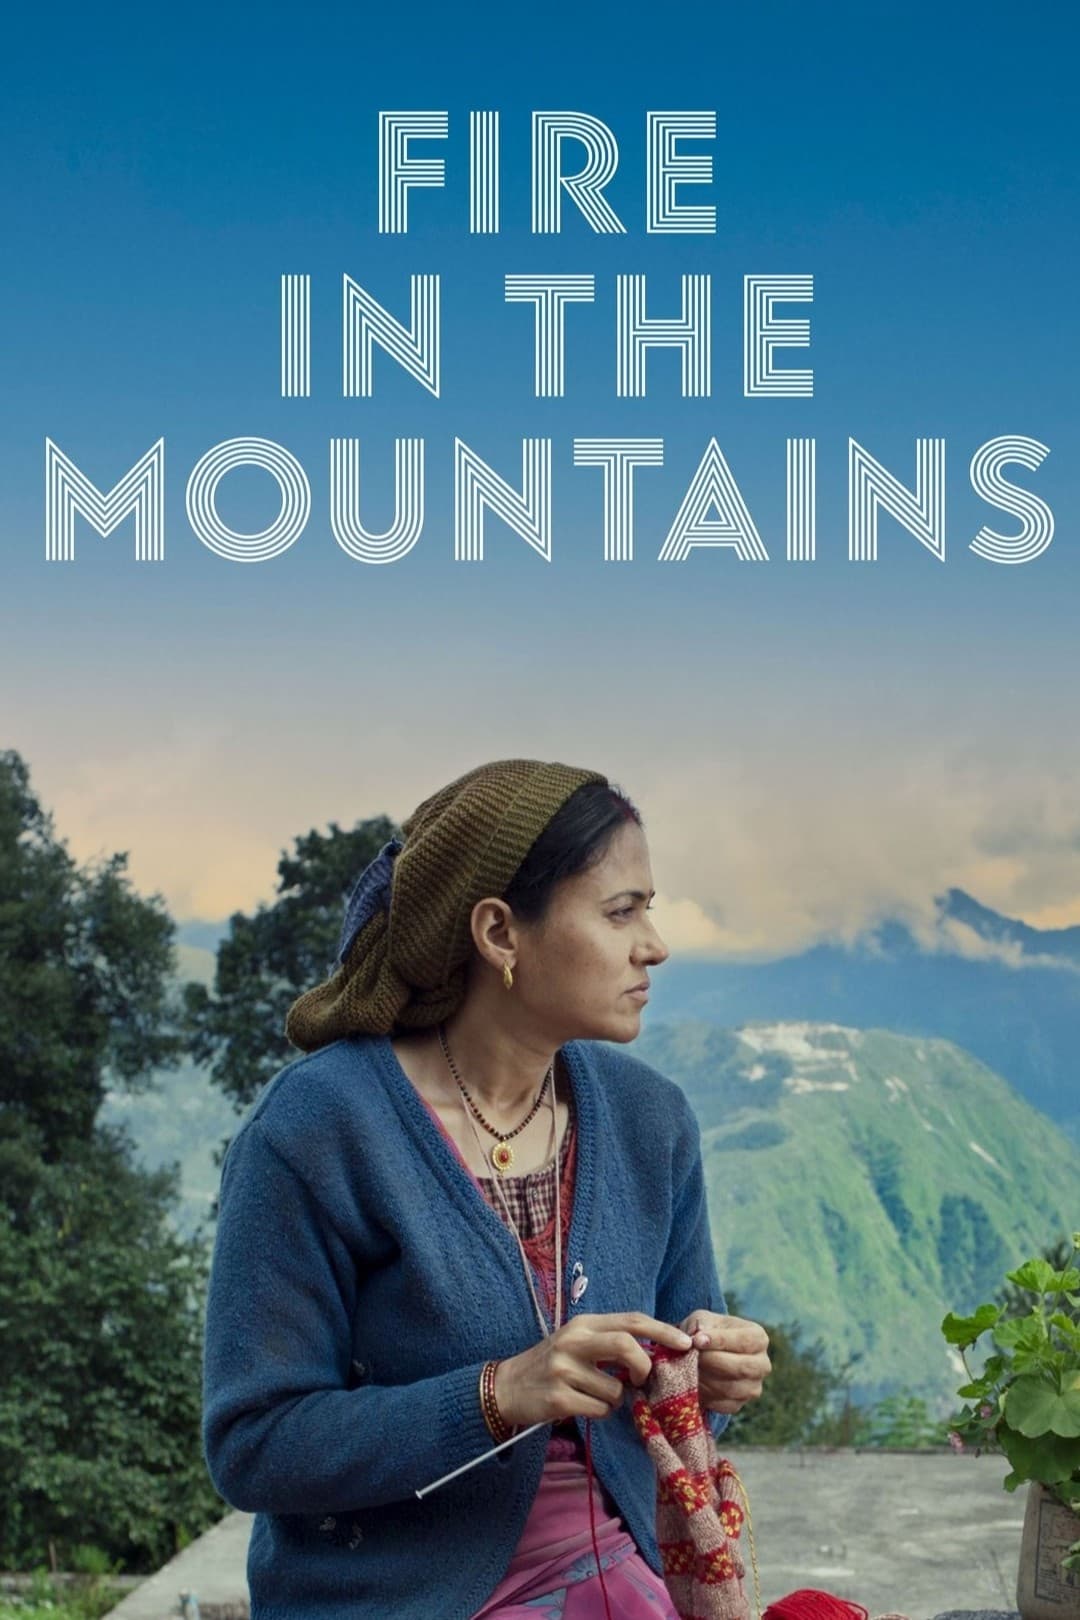 Fire in the Mountains (2022)